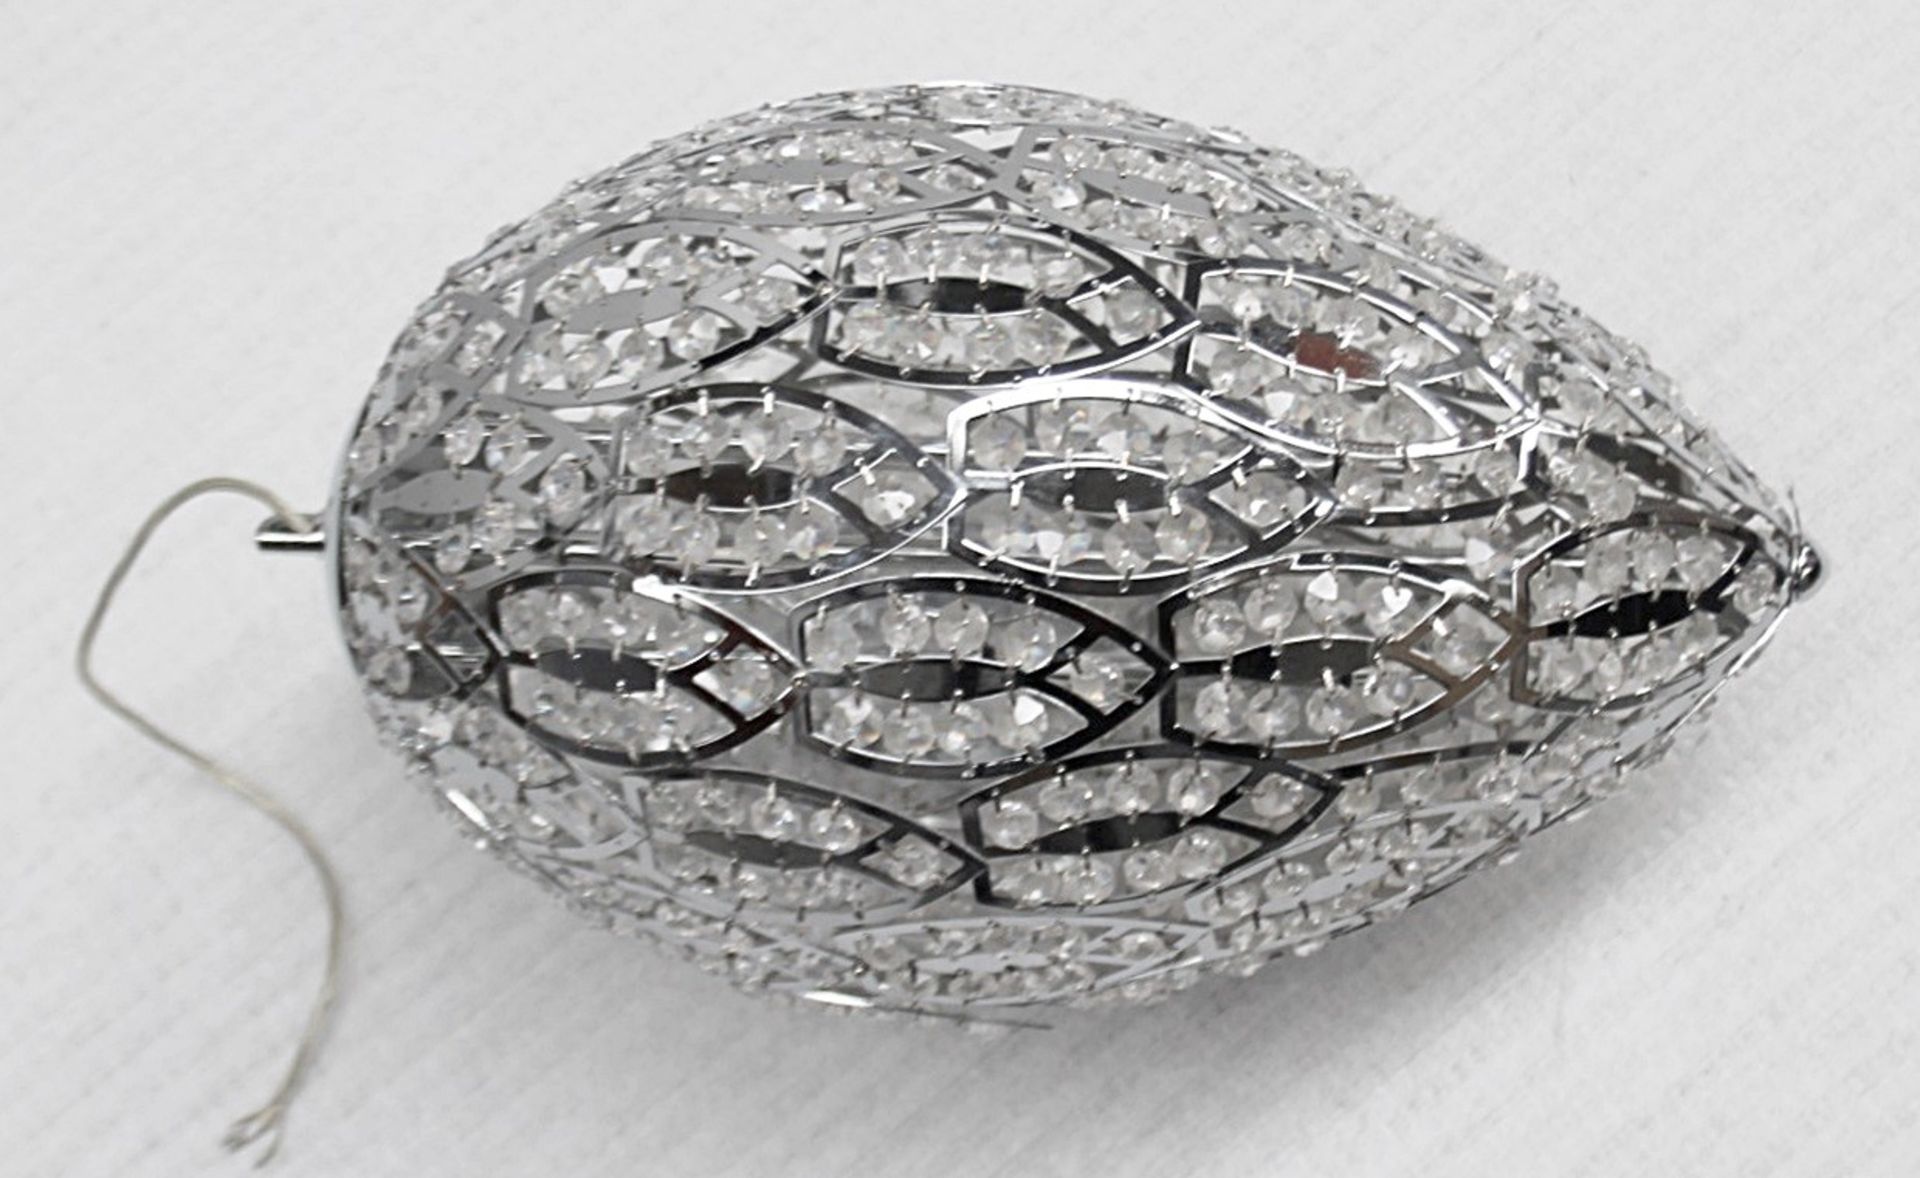 1 x High-end Italian LED Egg-Shaped Light Fitting Encrusted In Premium ASFOUR Crystals - RRP £4,000 - Image 9 of 9